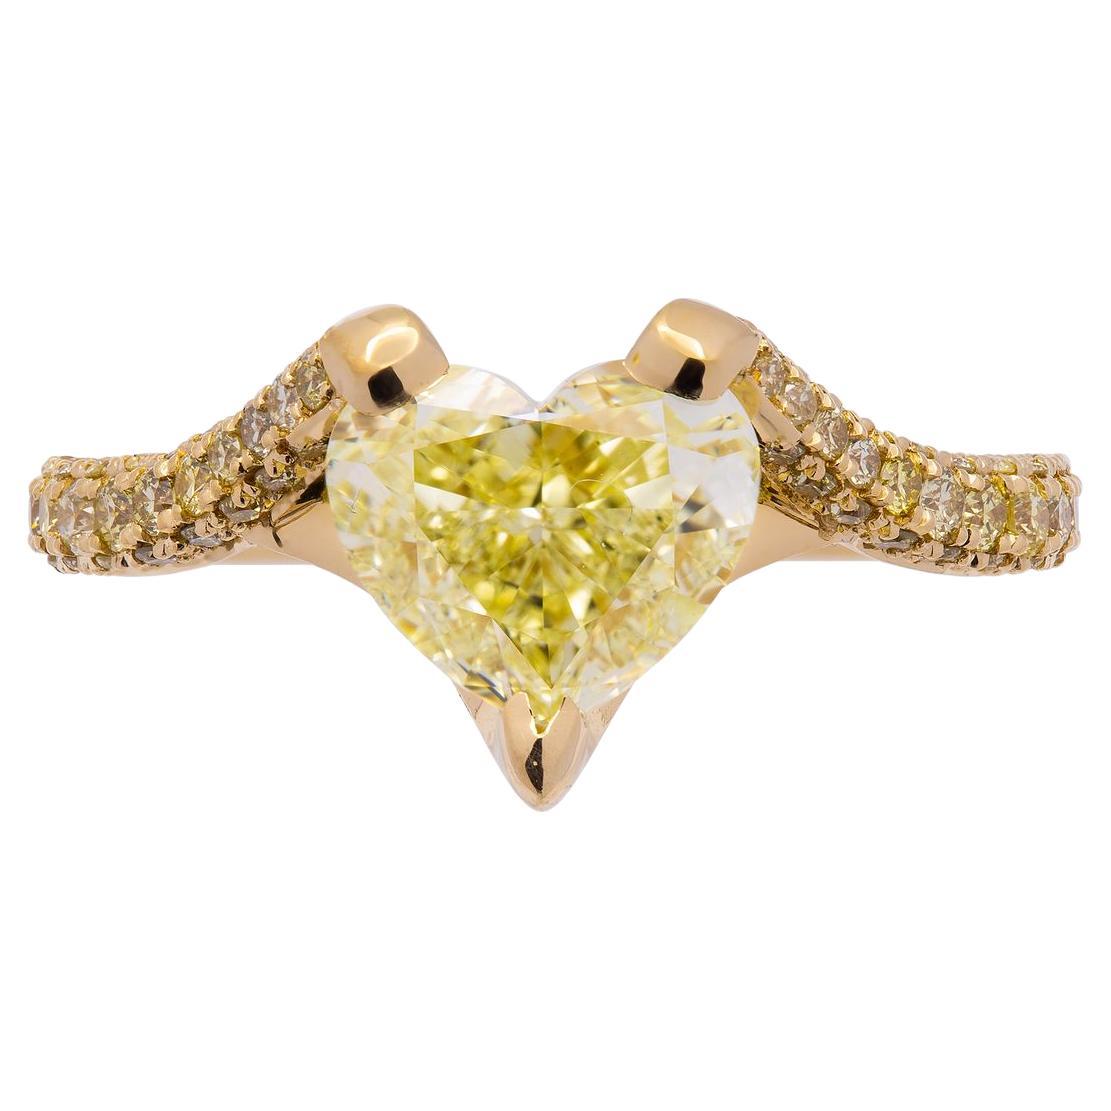 Engagement ring in 18K Yellow Gold
Center: 3.01ct Fancy Yellow SI1 Heart Shape Diamond GIA#6421252302 Fancy Yellow Diamond 
3 ROW shank; diamond prongs; diamond bridge 
TCW pave yellow: 0.83ct
 Size: 6